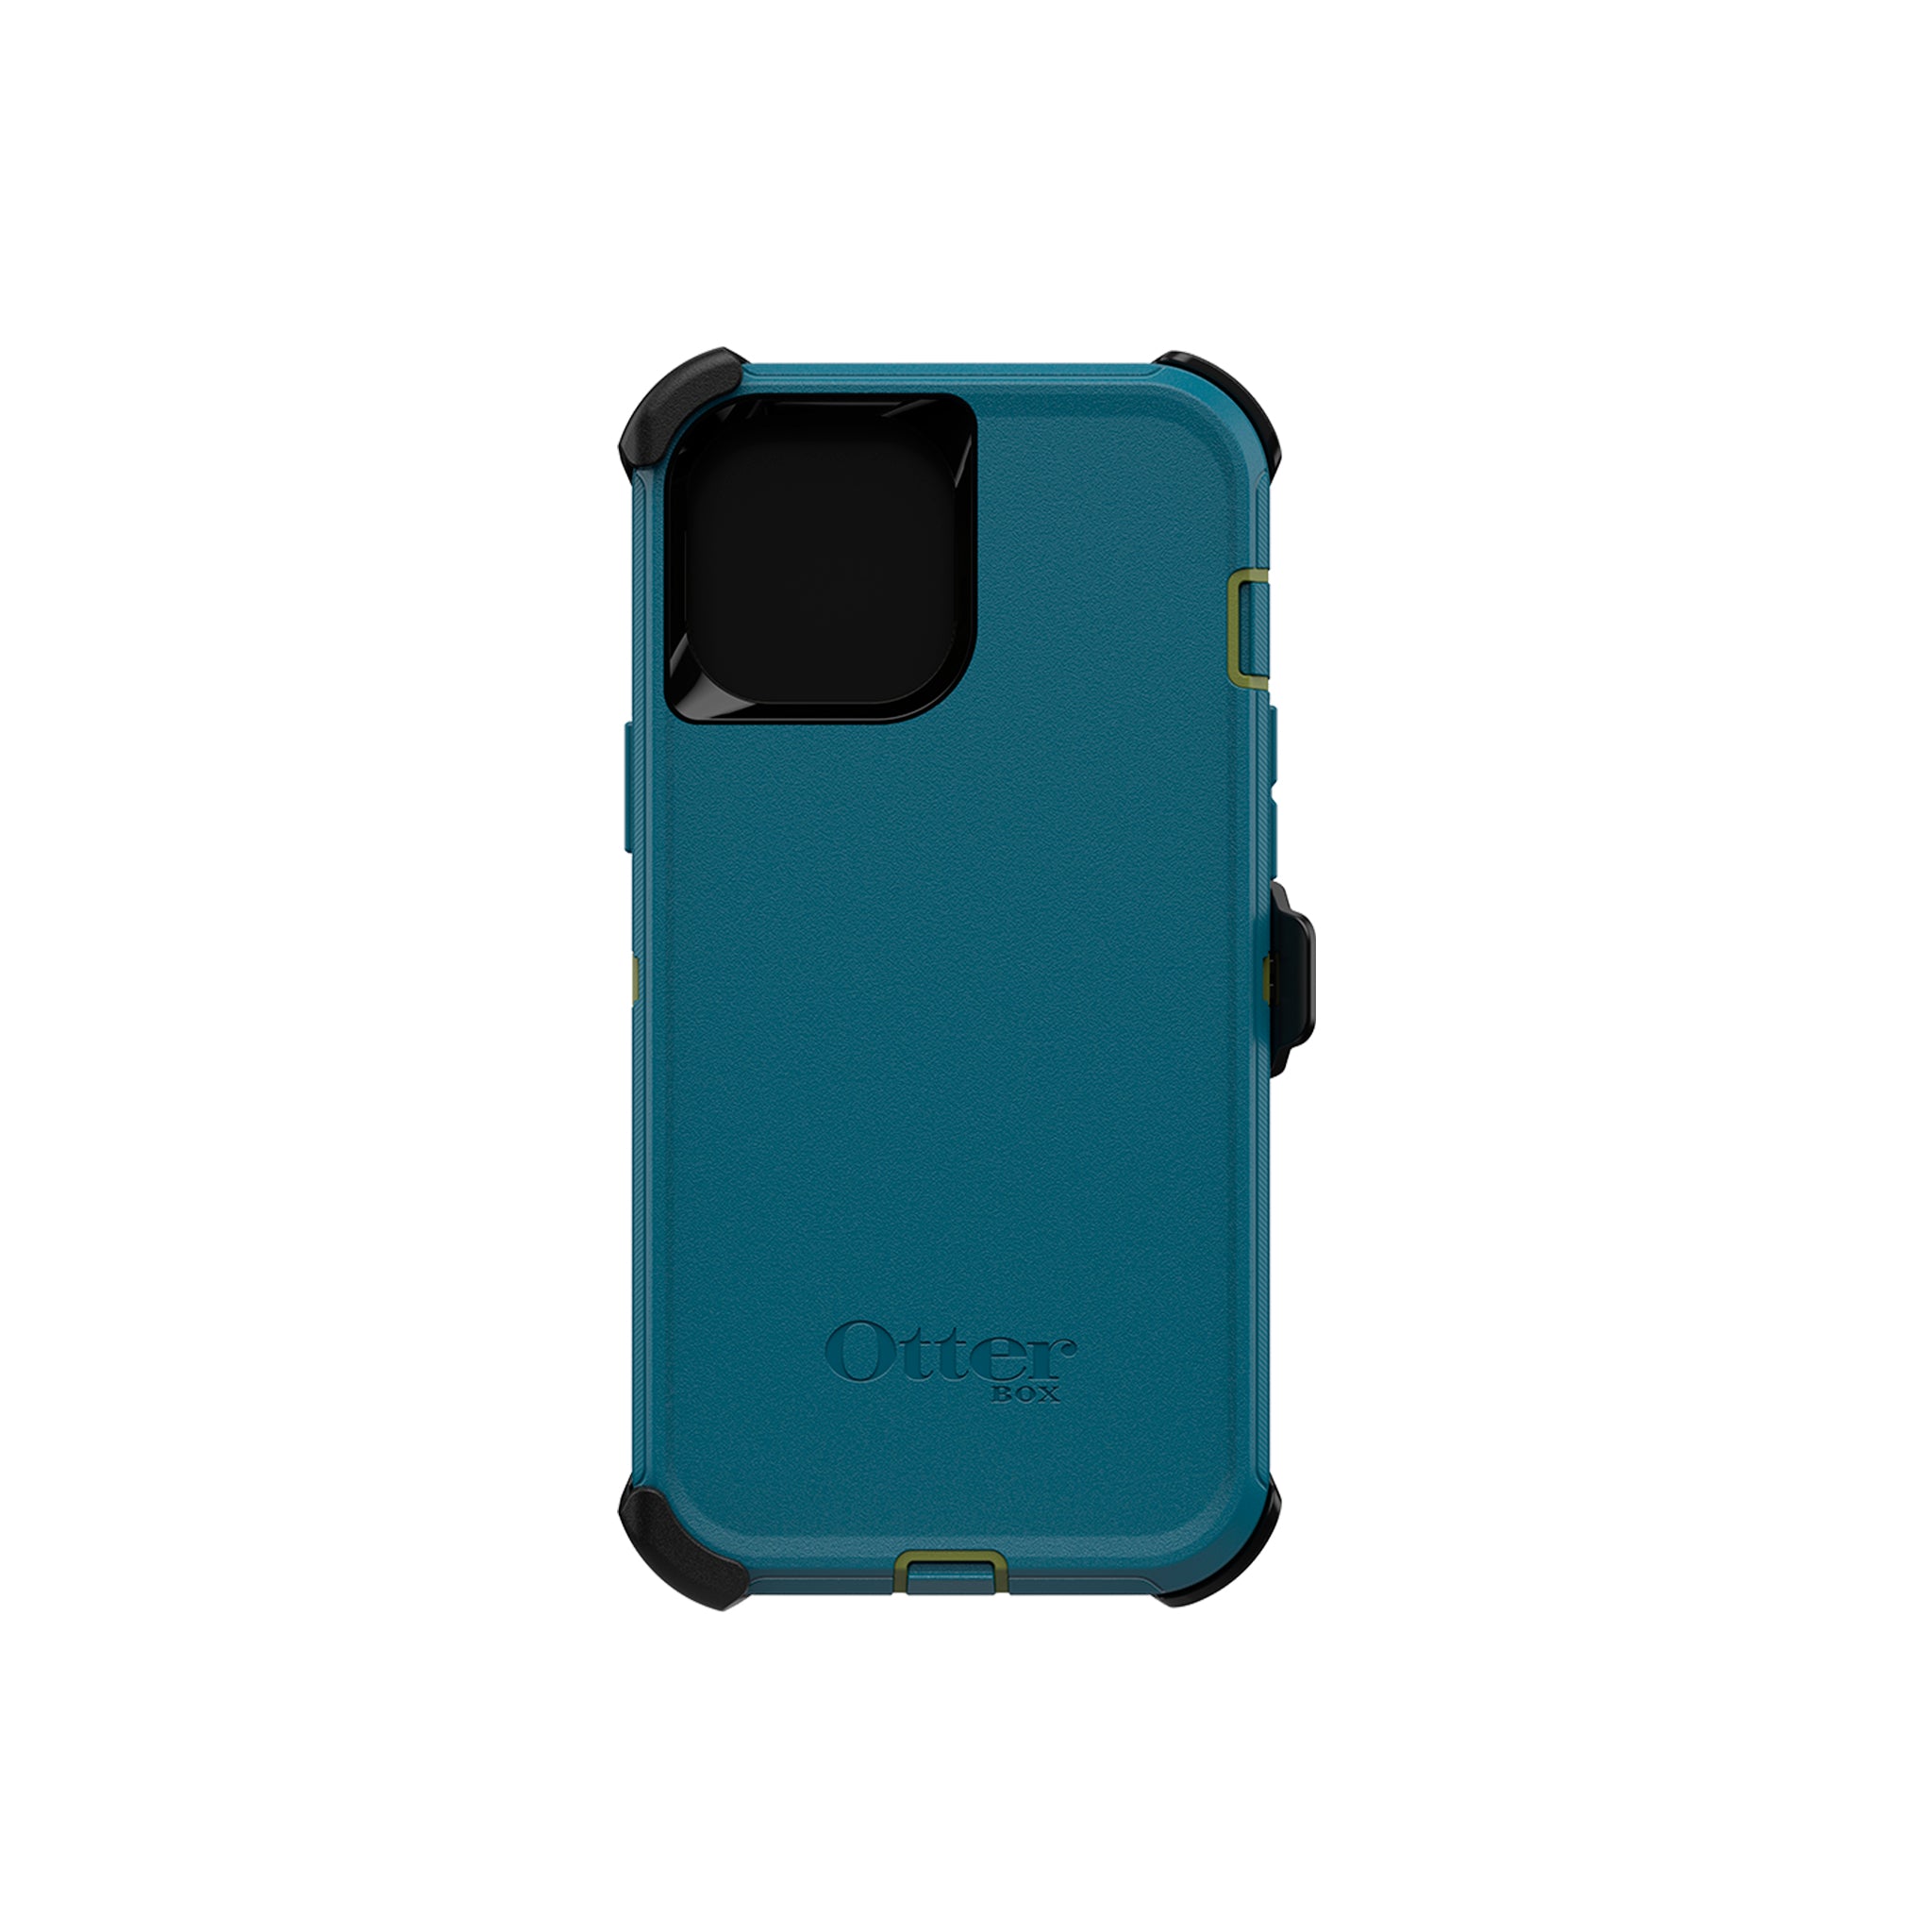 OtterBox - Defender for iPhone 12 Pro Max - Teal Me About It